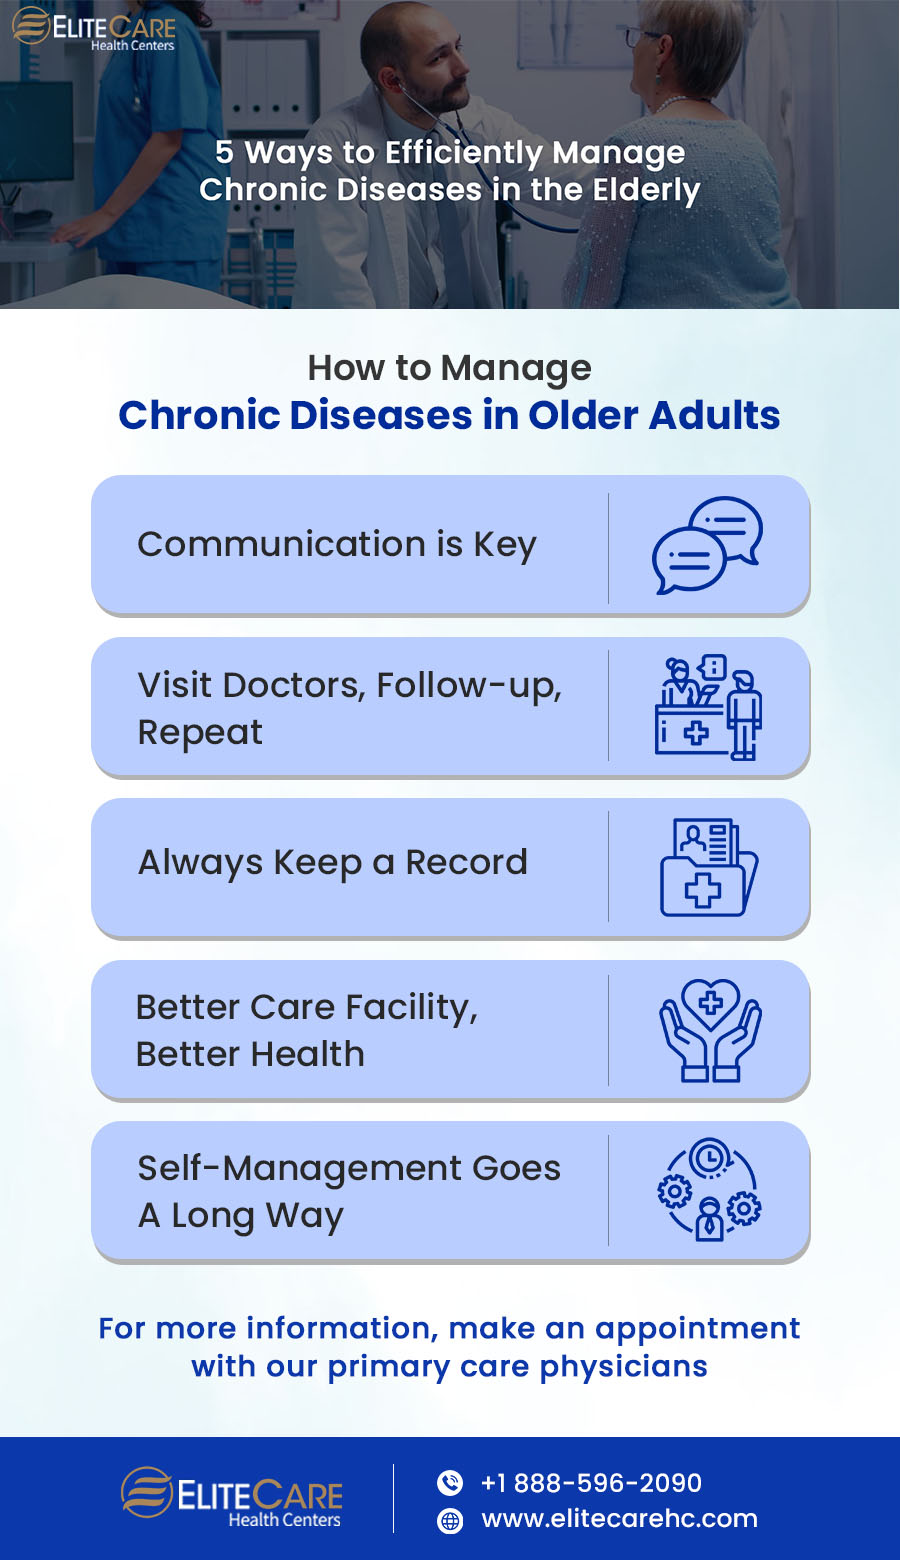 Manage Chronic Diseases in The Elderly | Infographic